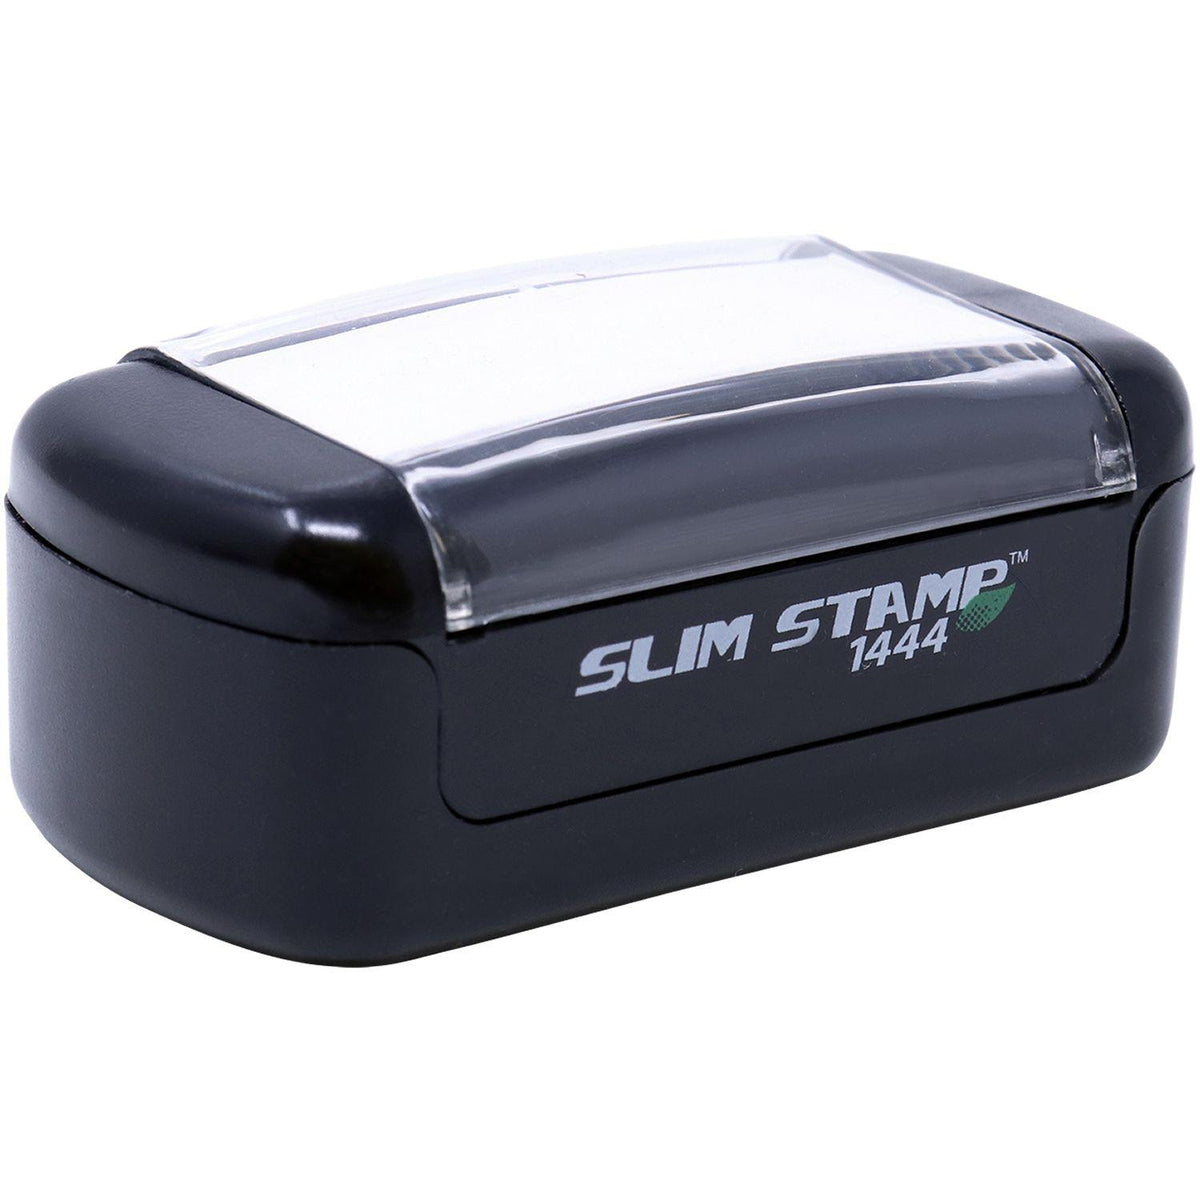 Alt View of Slim Pre-Inked Special Standard Mail Stamp Mount Angle